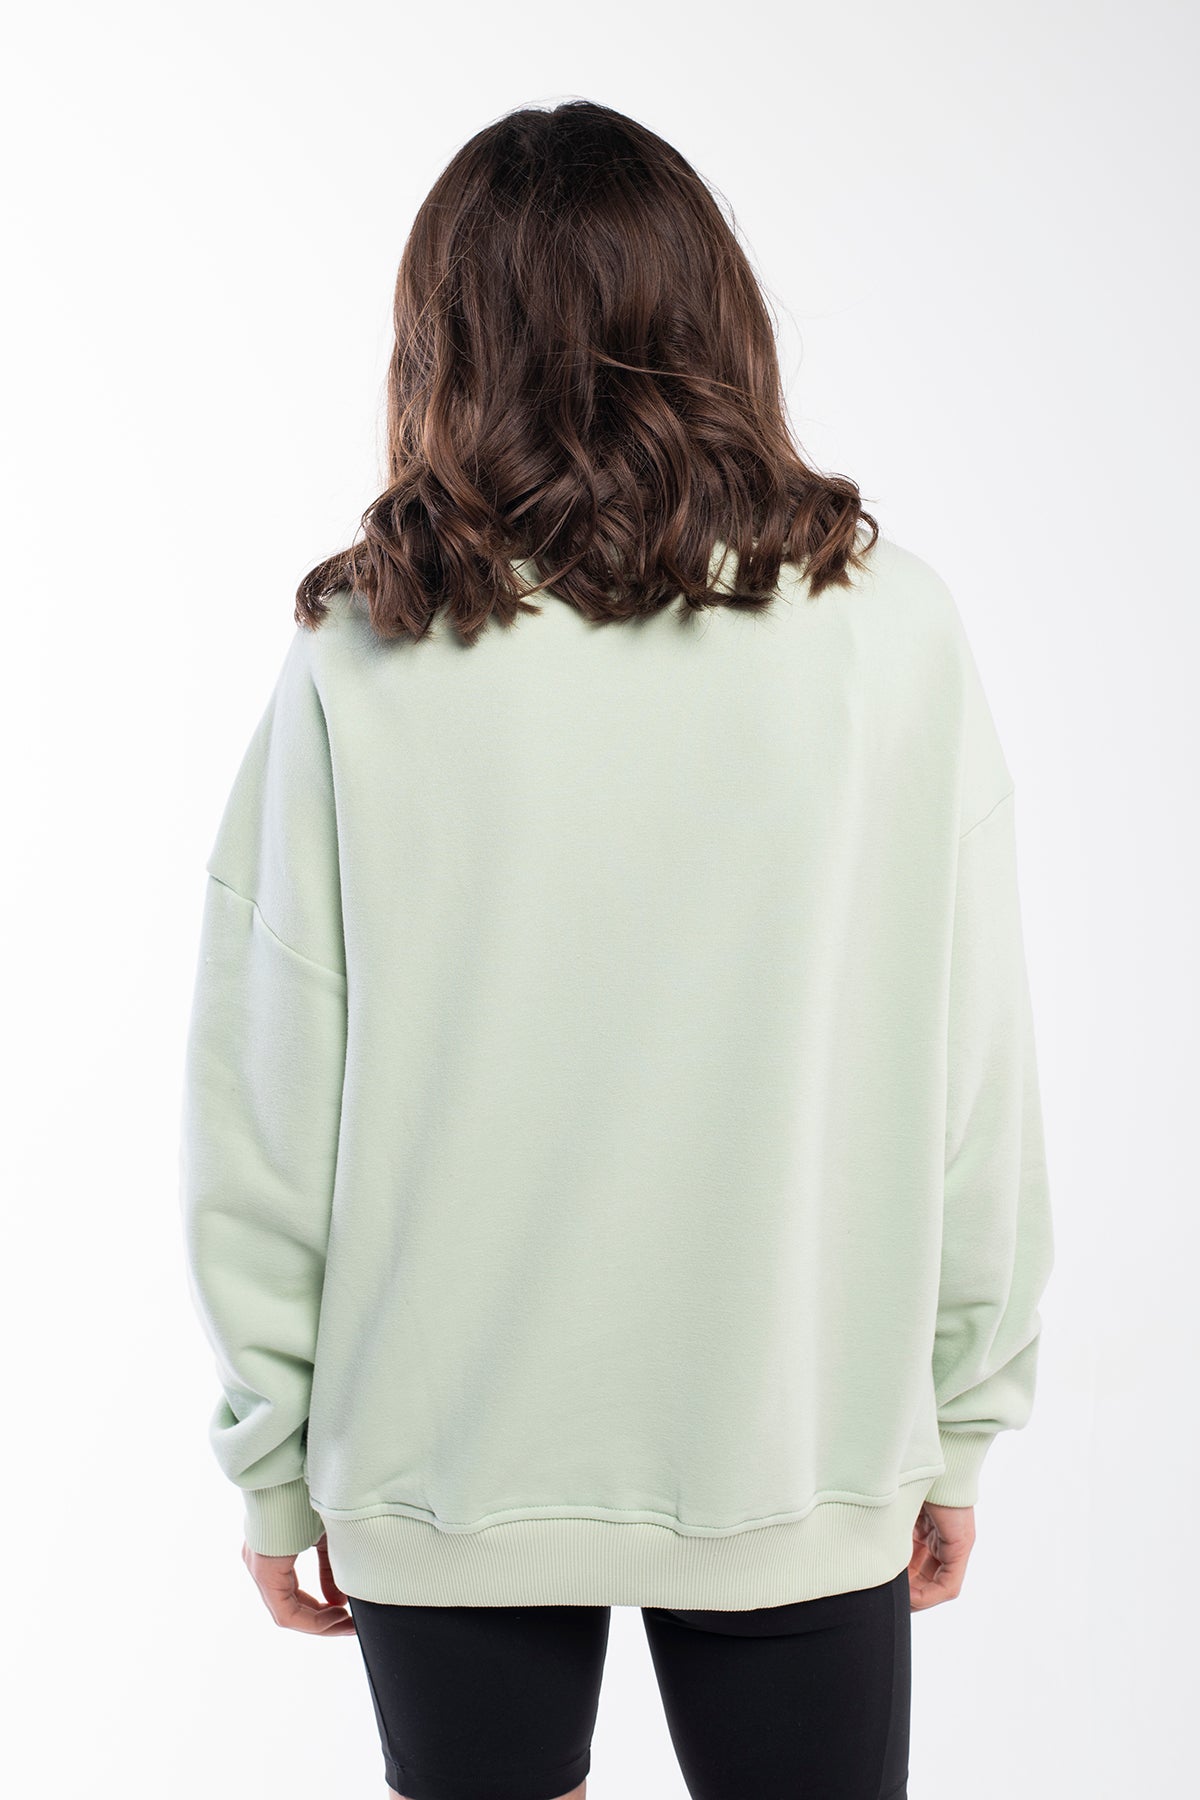 Pastel mint green balance stones sweatshirt with a round neck is classy and timeless